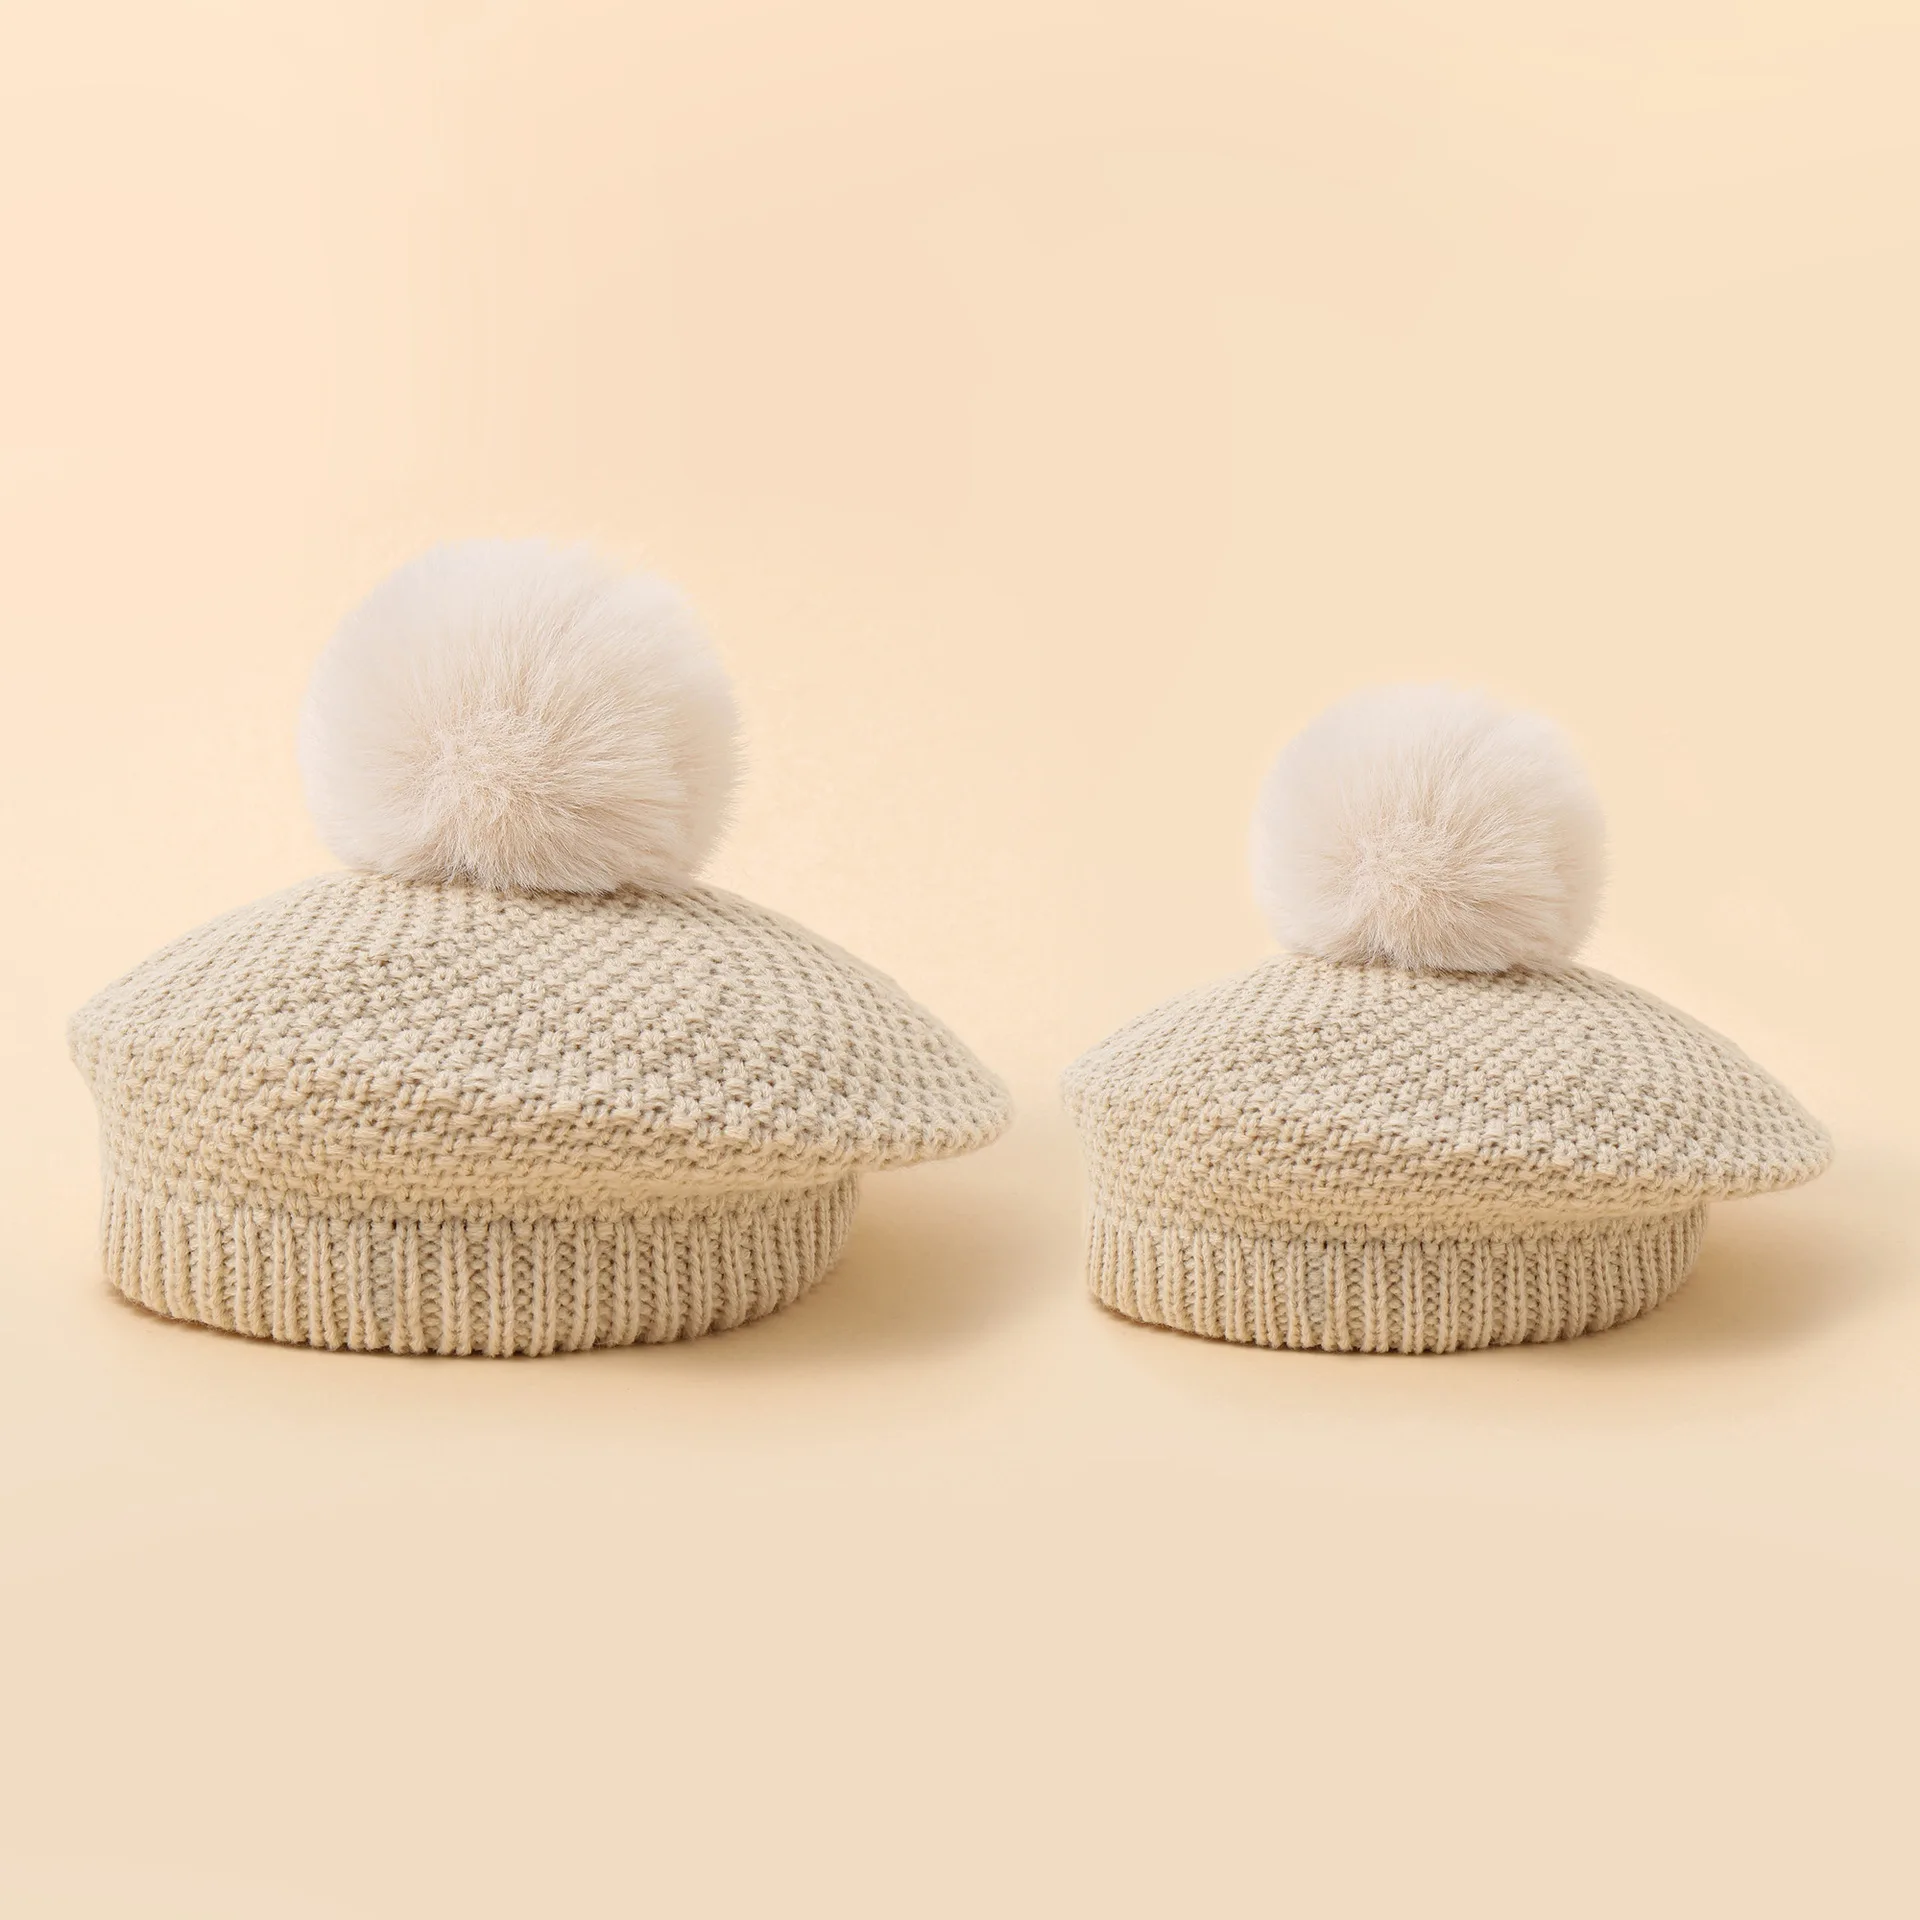 

Knitted Mother Kids Hat Winter Baby Beanie Hats Pompom Beret Warm Children Cap for Girls Boys Accessories New Infant Stuff